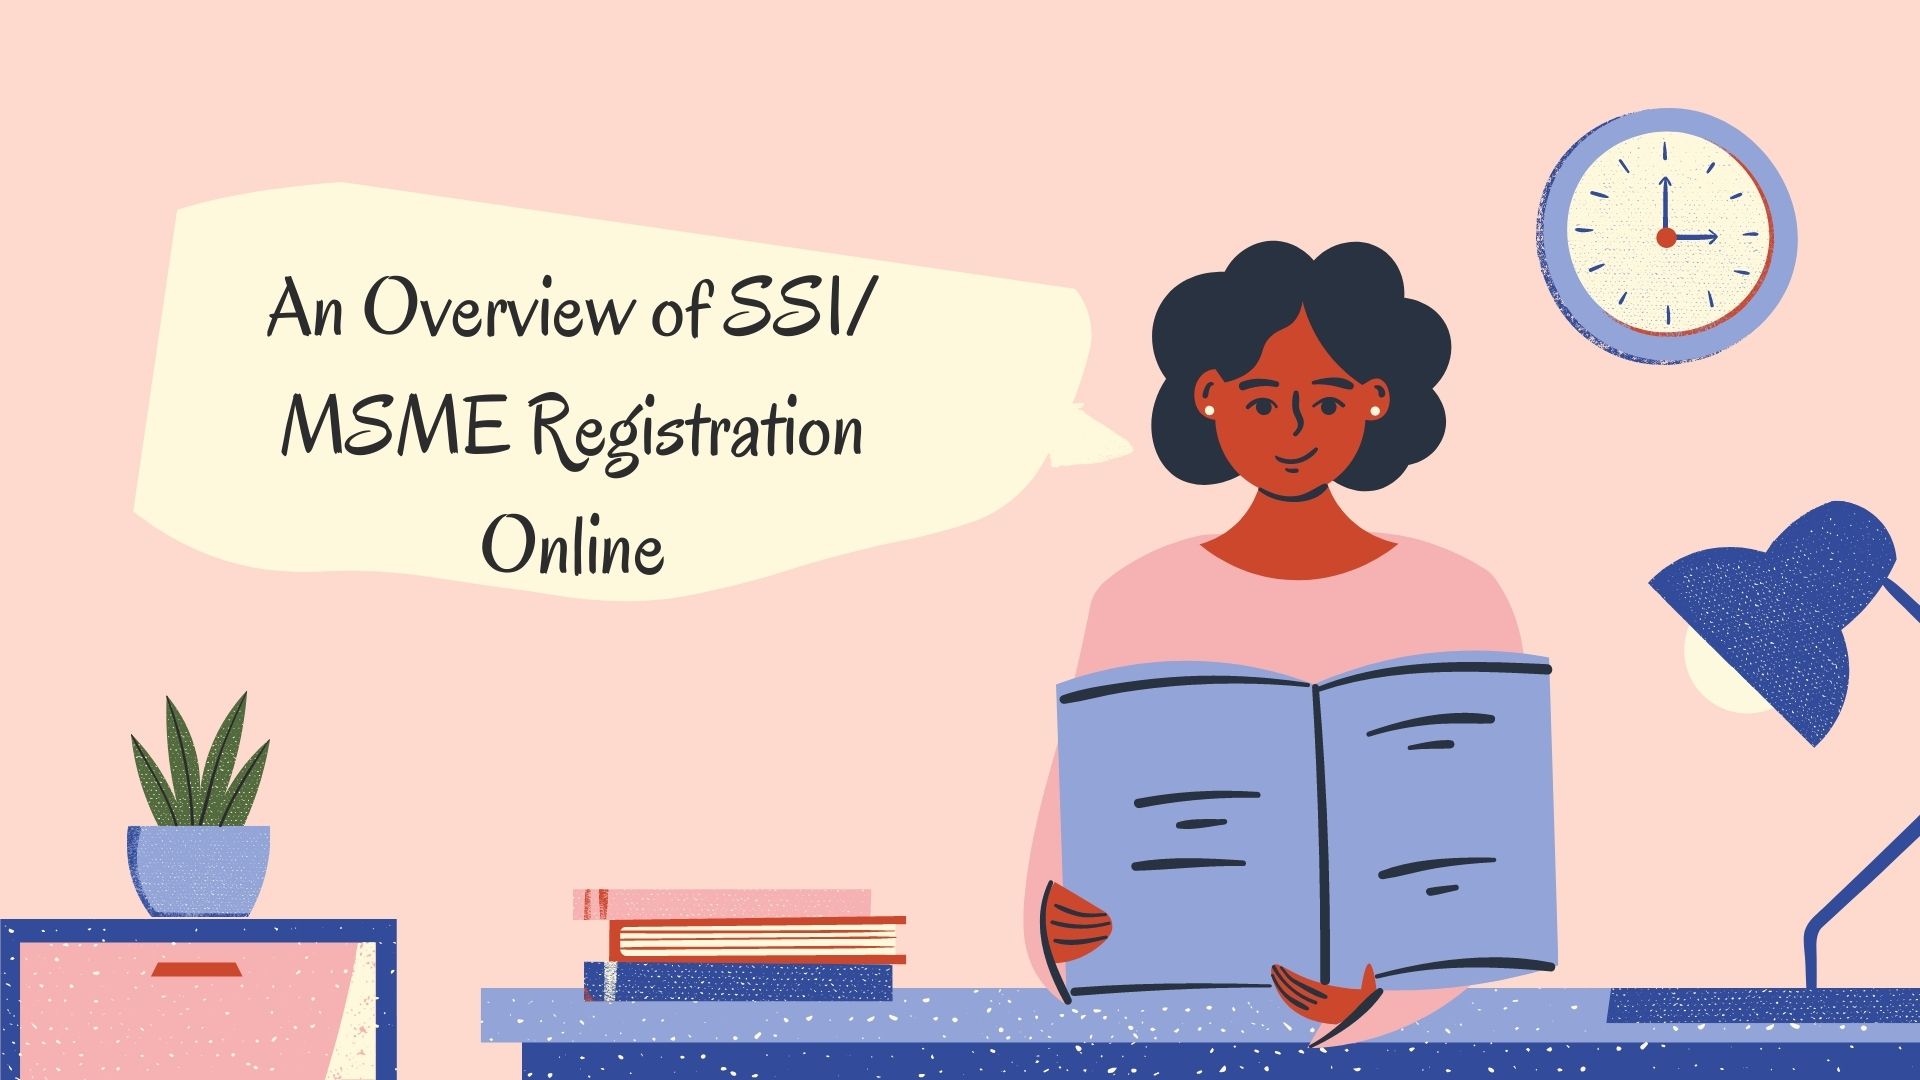 An Overview of SSI/ MSME Registration Online